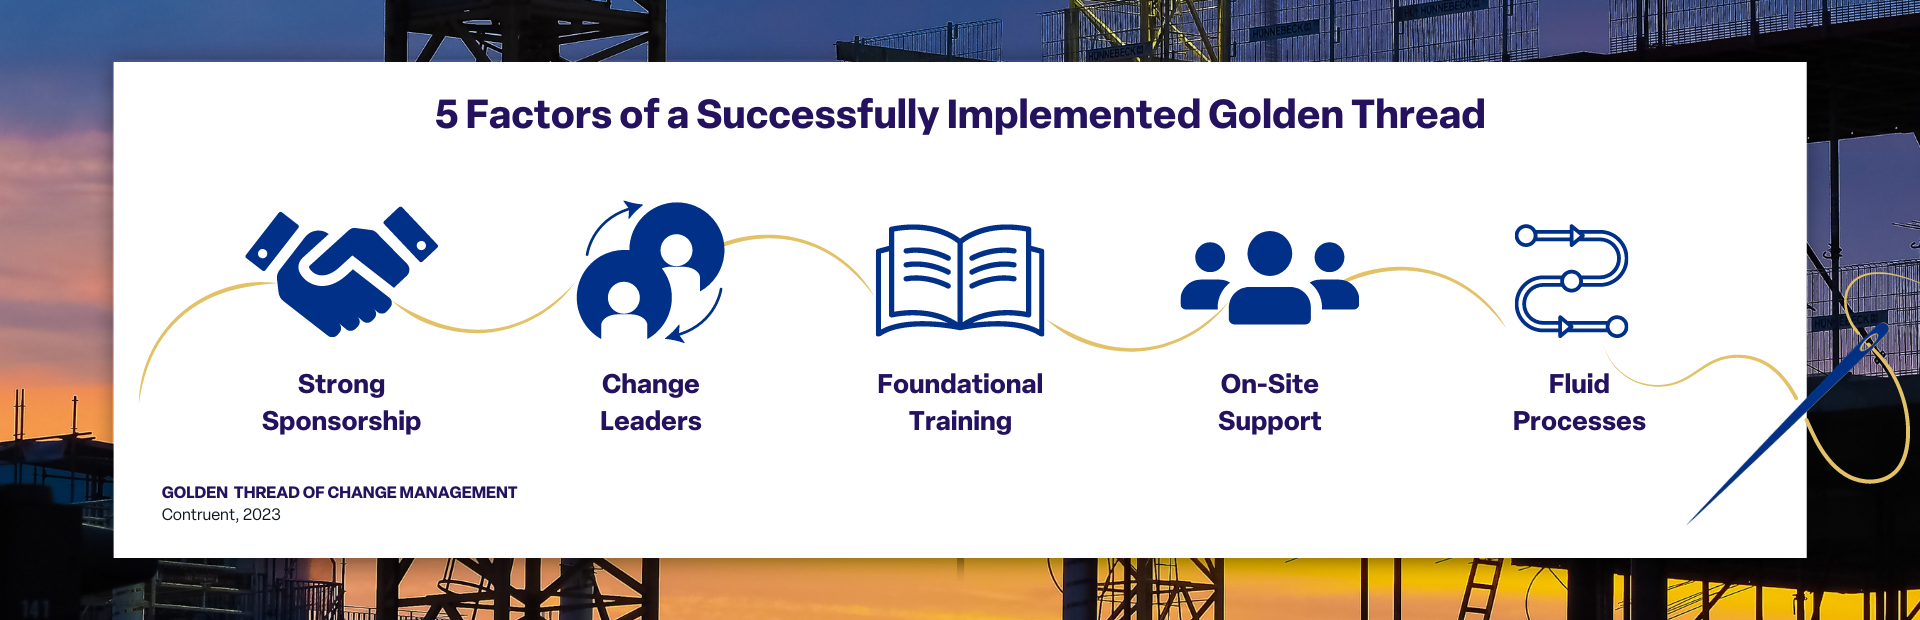 5 Factors of a Successfully Implemented Golden Thread